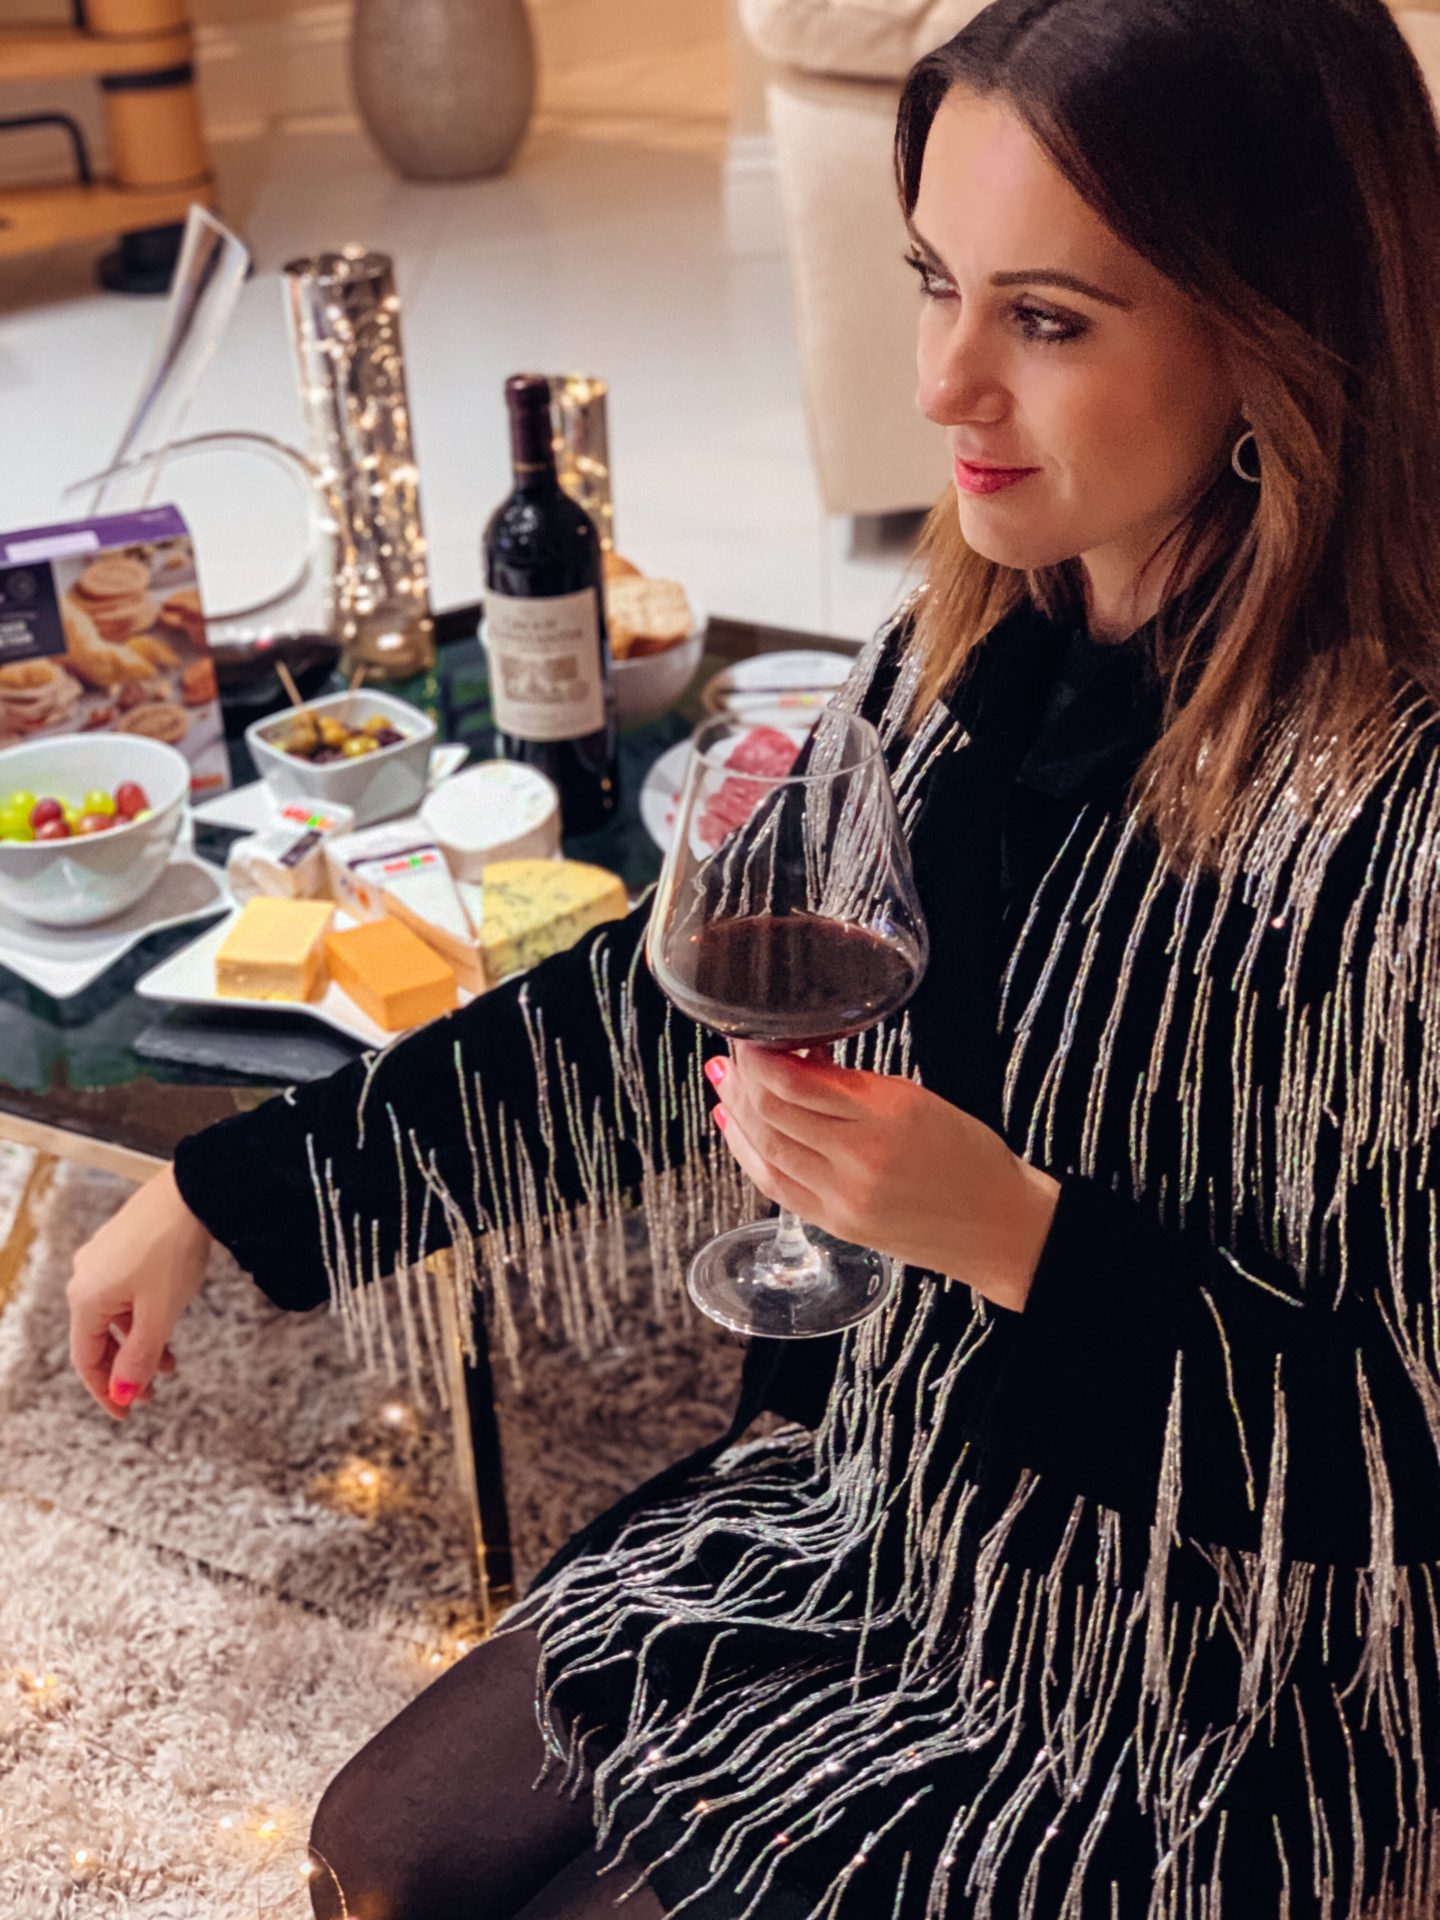 PINOTAGE RED WINE | RED WINE FOOD PAIRING | ASOS EDITION velvet beaded fringe blazer | BRIEF HISTORY OF PINOTAGE | TASTING NOTE OF PINOTAGE | SOUTH AFRICAN WINES